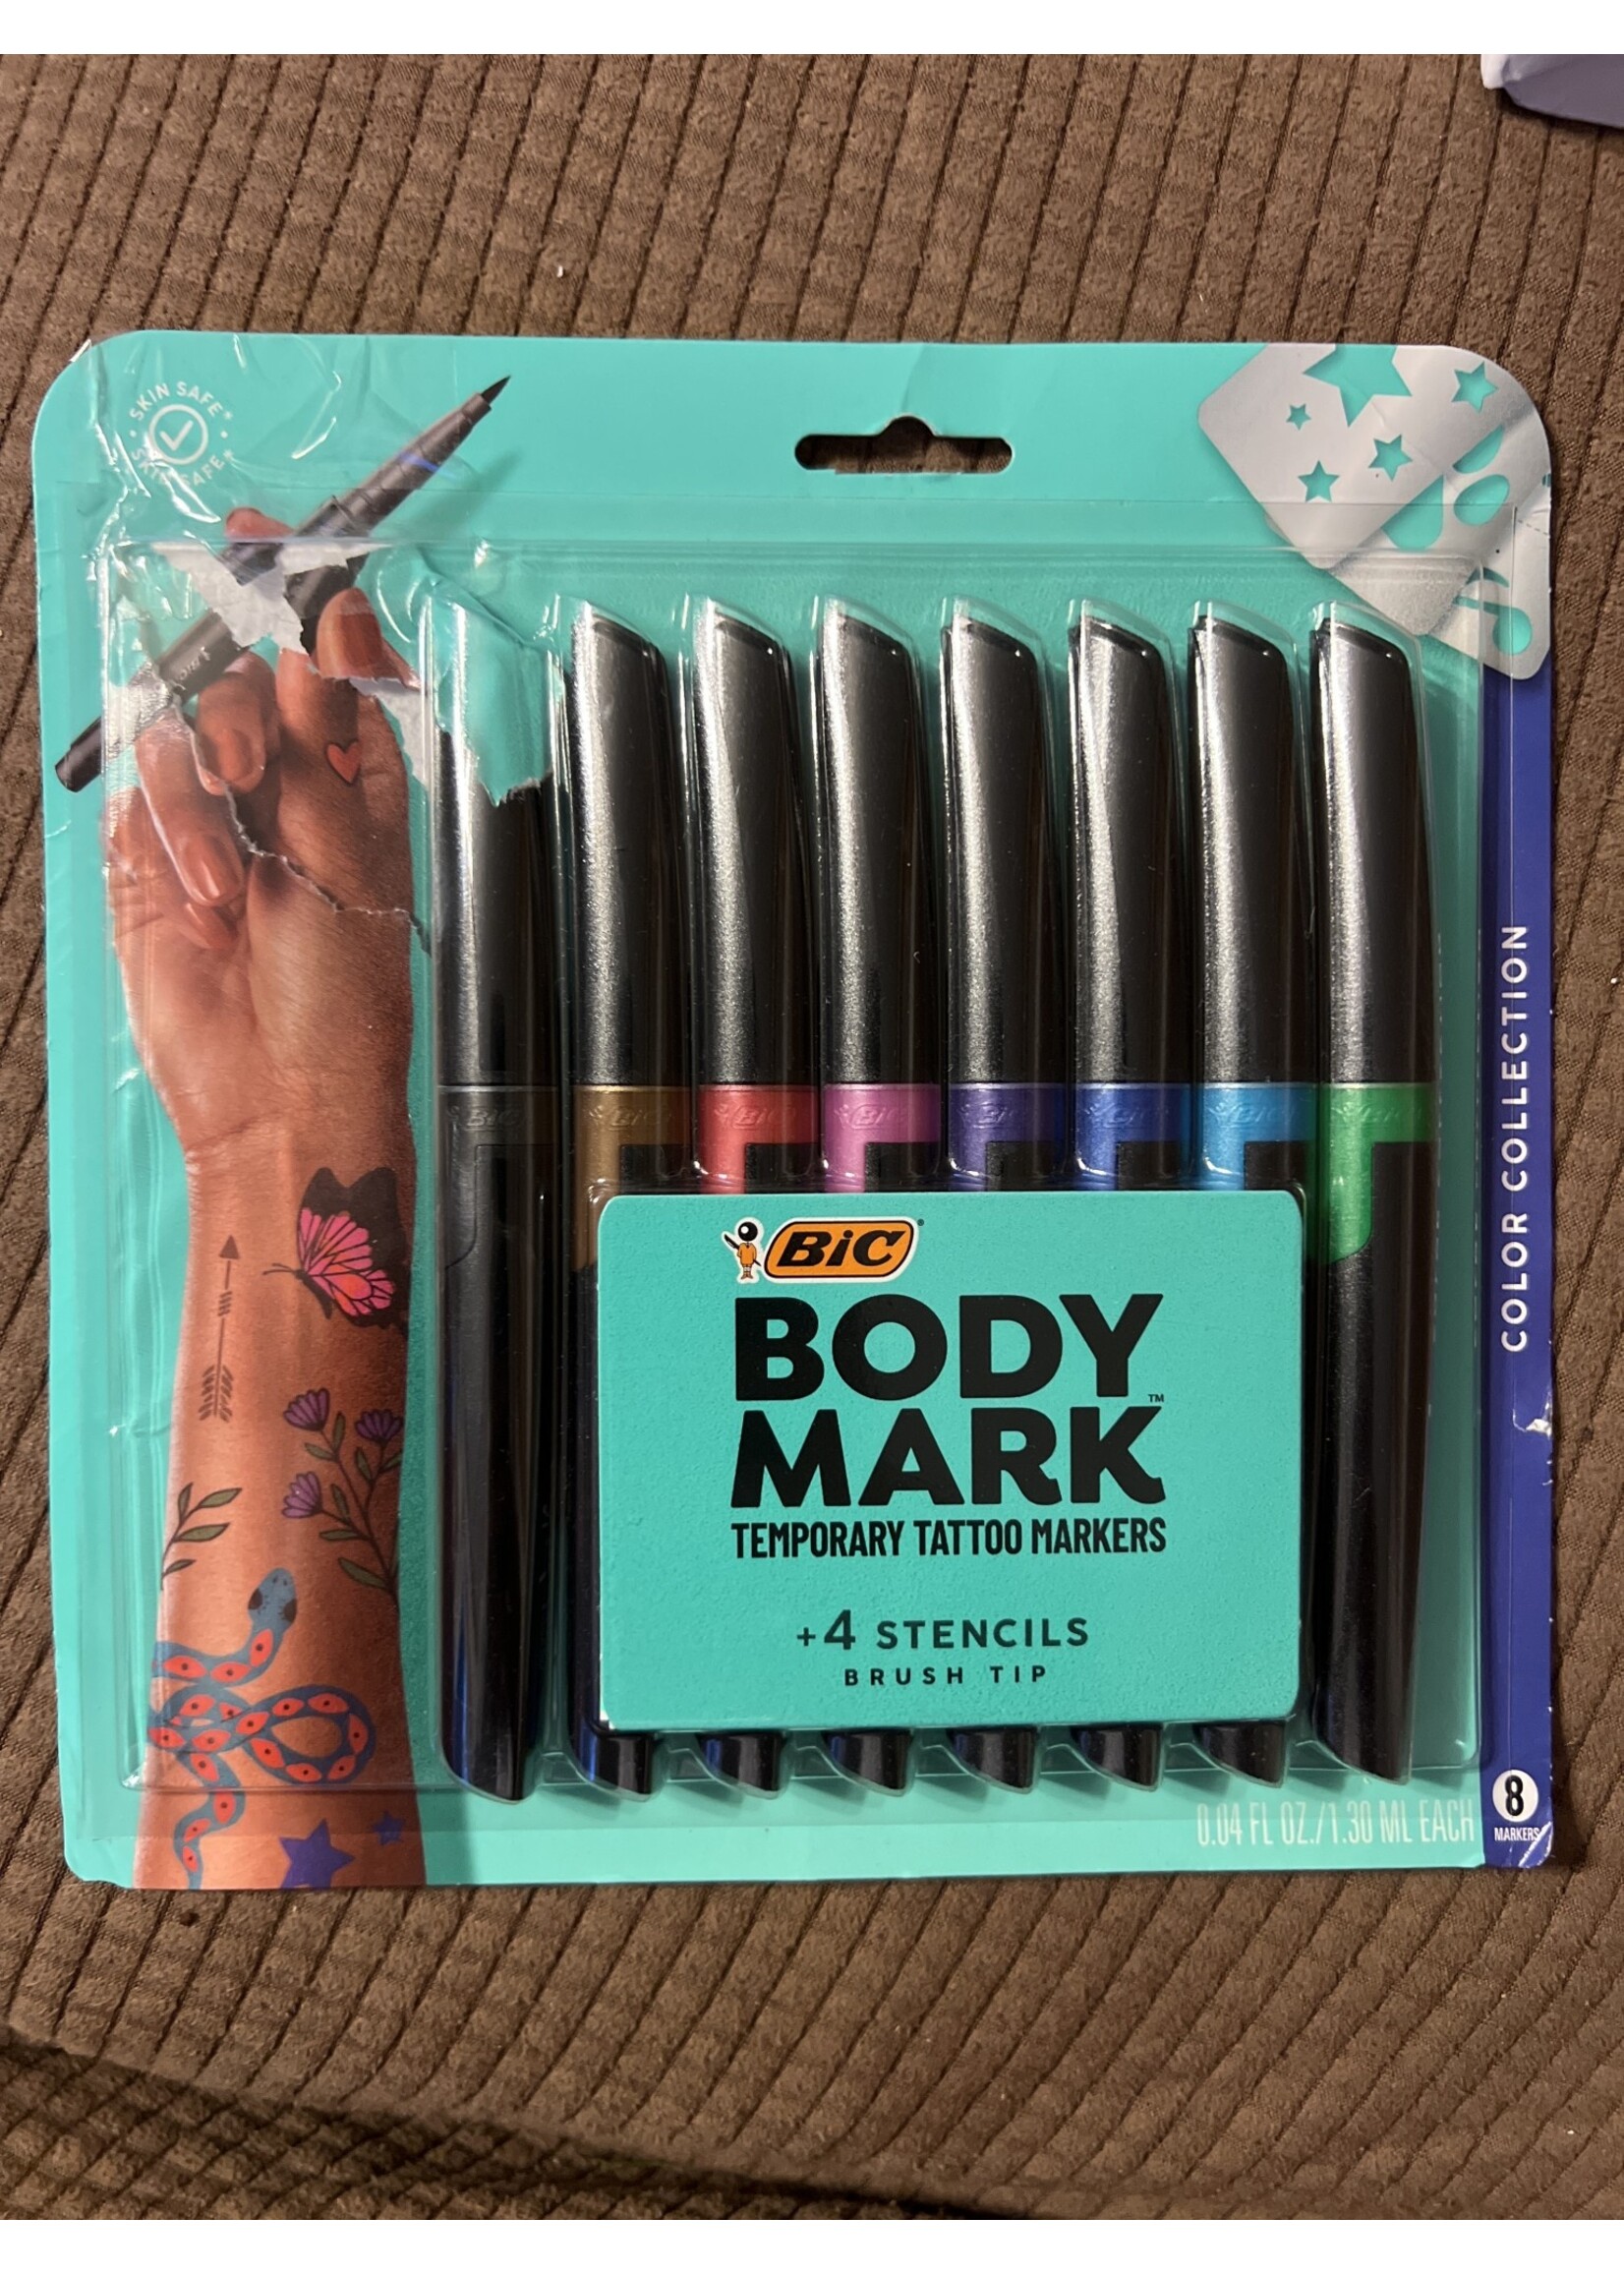 Bic BodyMark Temporary Tattoo Markers and Sets